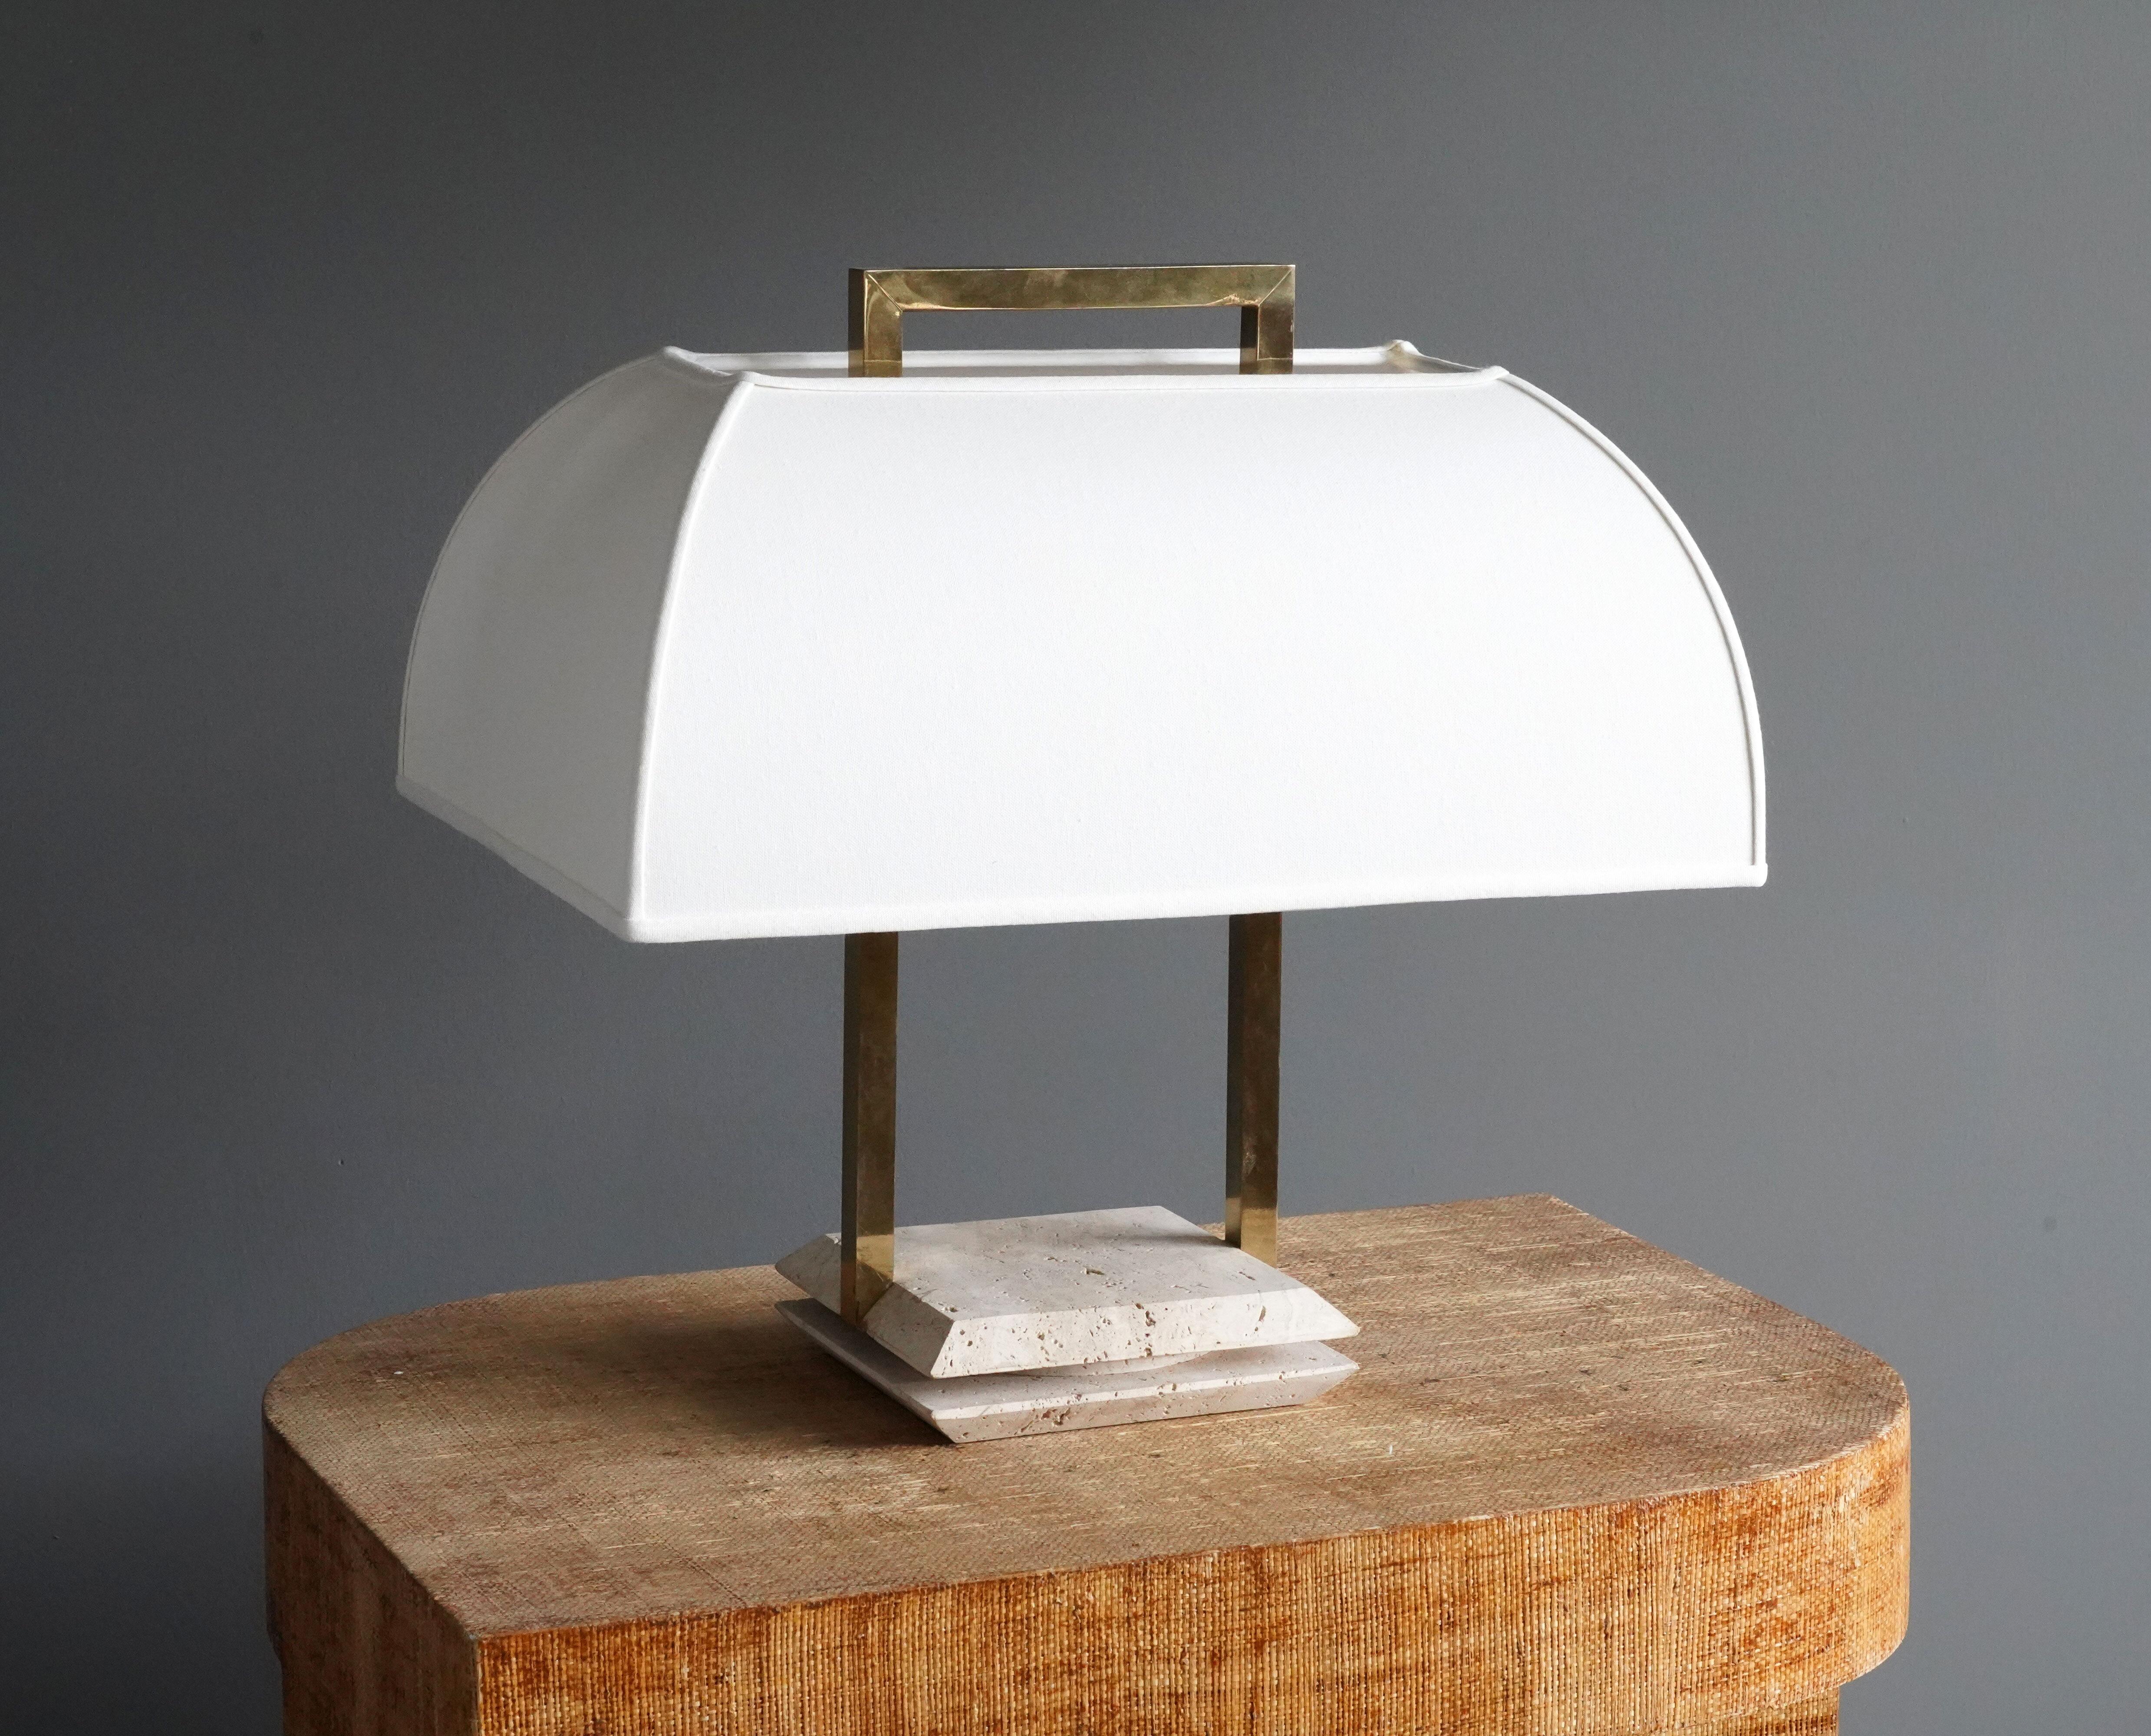 A table lamp designed and produced in Italy, 1970s. Features brass and a travertine base Lampshade recovered in white fabric. 

Other designers of the period include Max Ingrand, Angelo Lelii, Paul Evans, Gabriella Crespi, and Paavo Tynell.